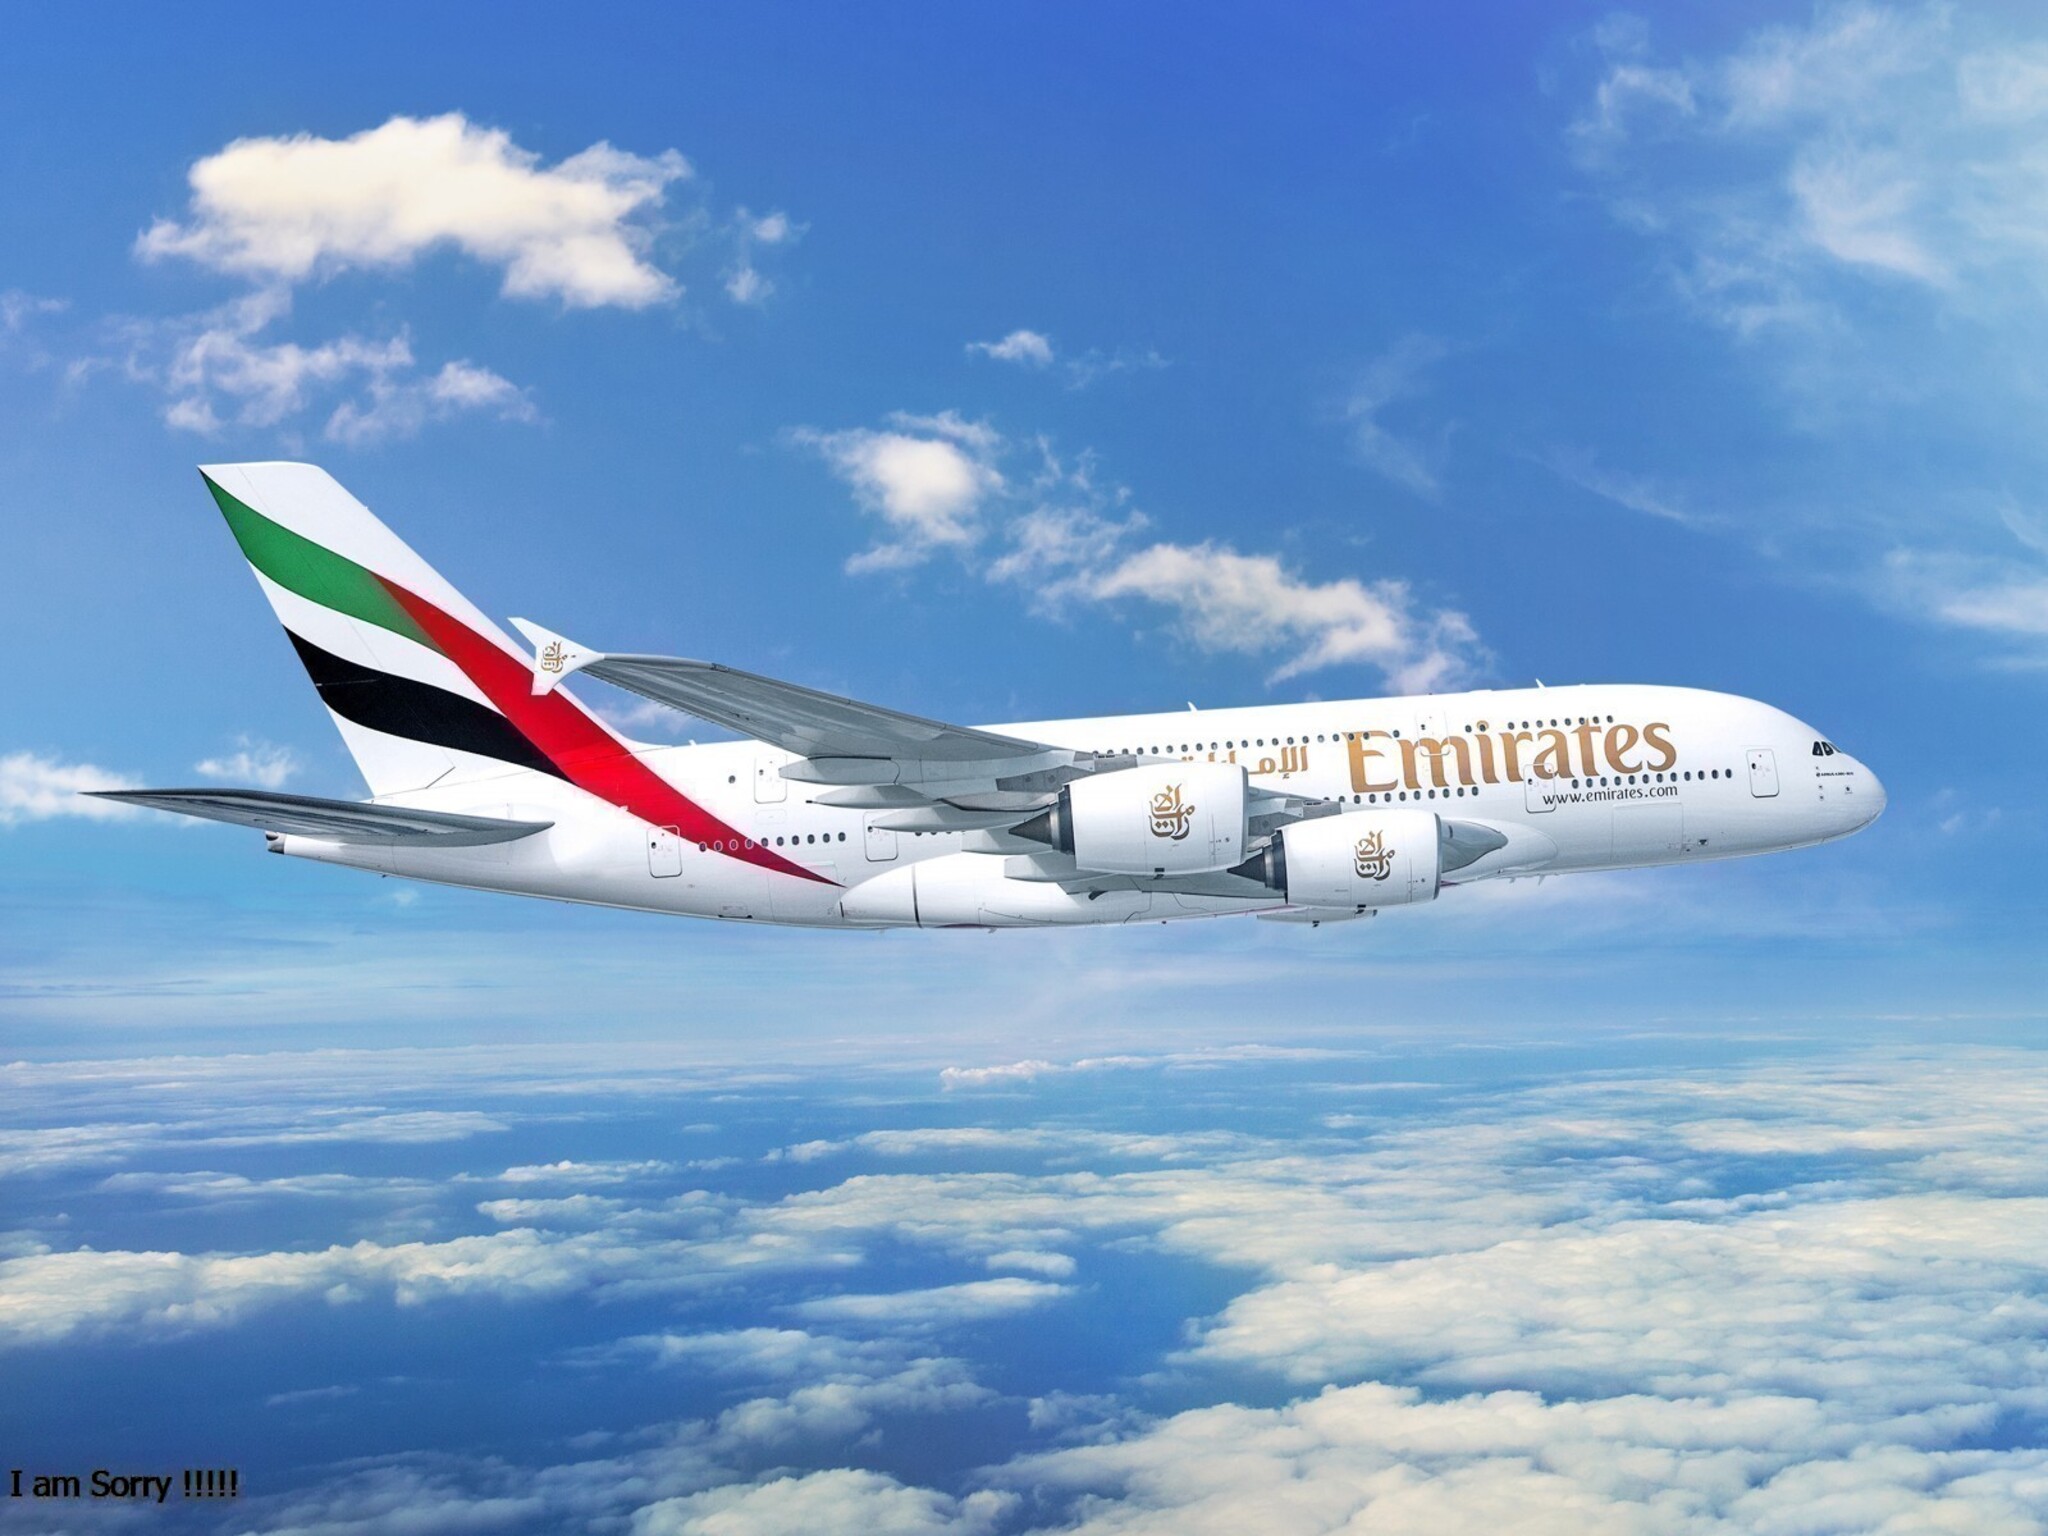 Emirates Airlines launches flights to 9 new destinations